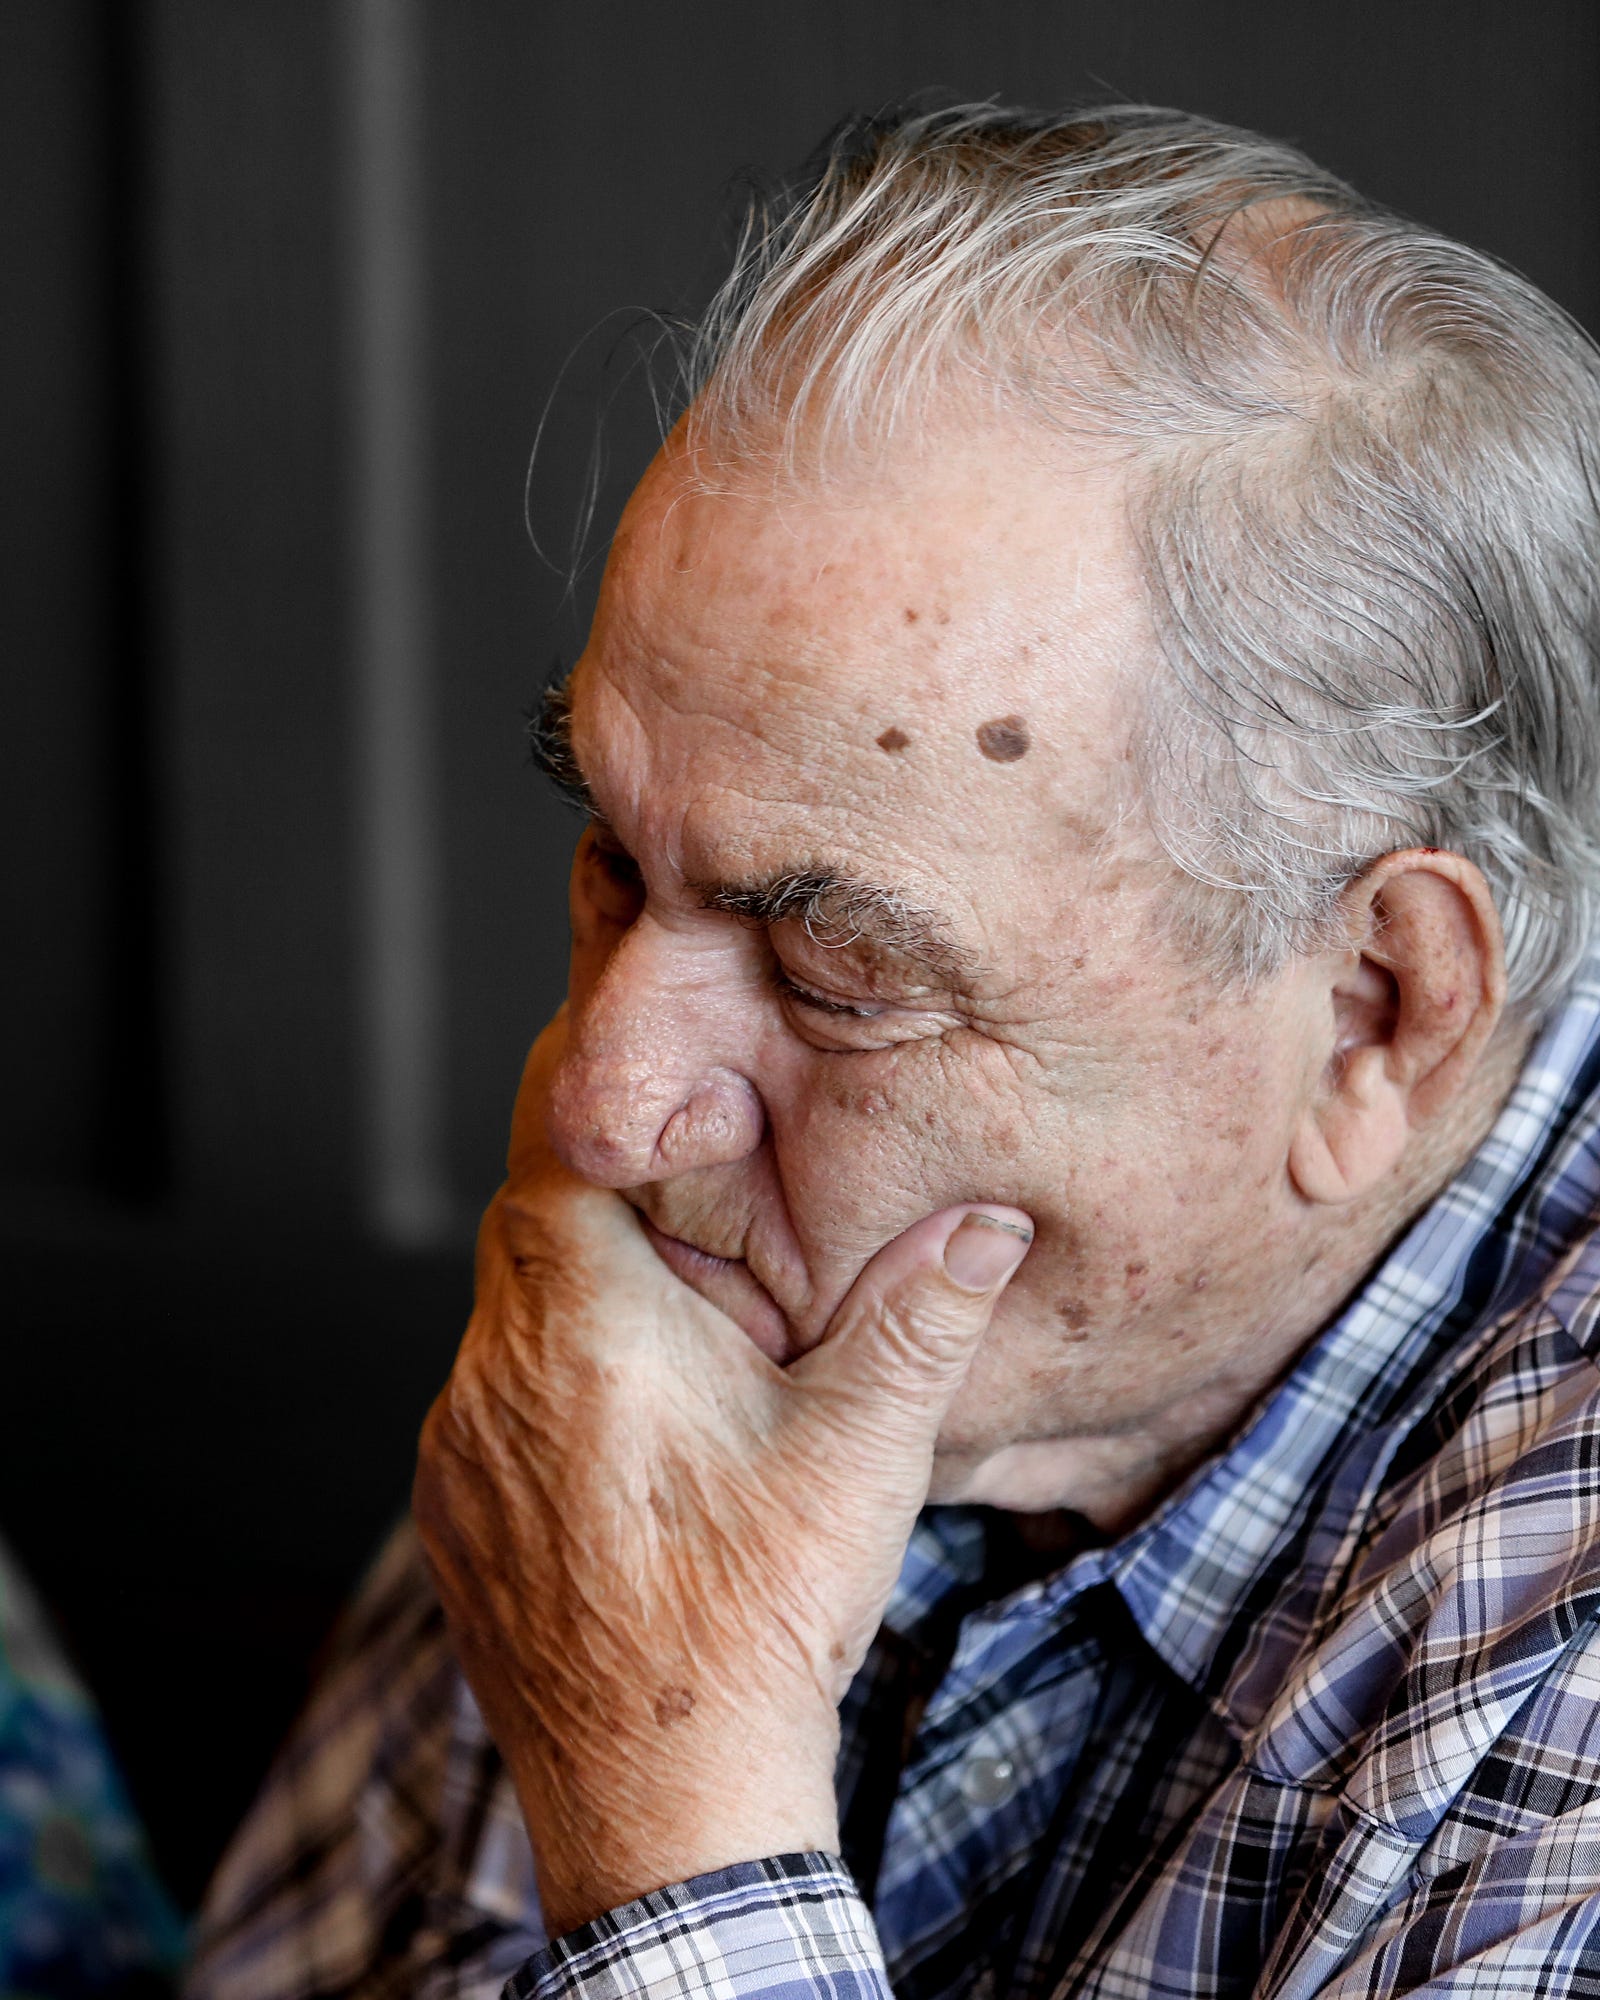 An elderly white man faces left, eyes closed as he grasps his loewr face with his left hand. Diet appears to influence the risk of dementia, including Alzheimer’s disease.